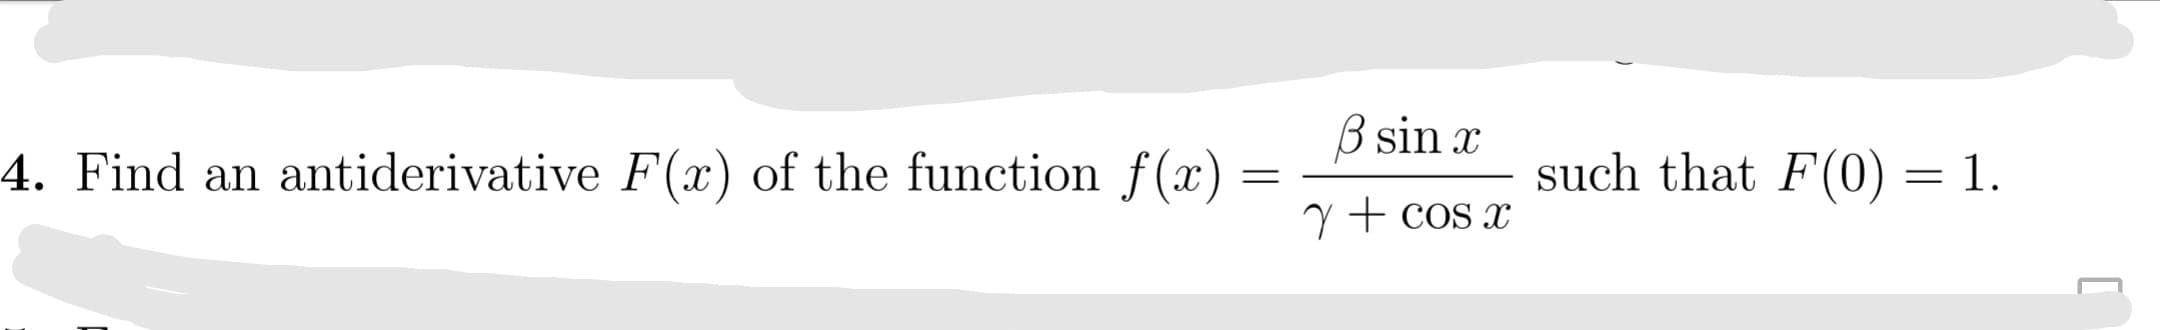 B sin x
Find an antiderivative F(x) of the function f(x)
such that F(0) = 1.
y + cos x
